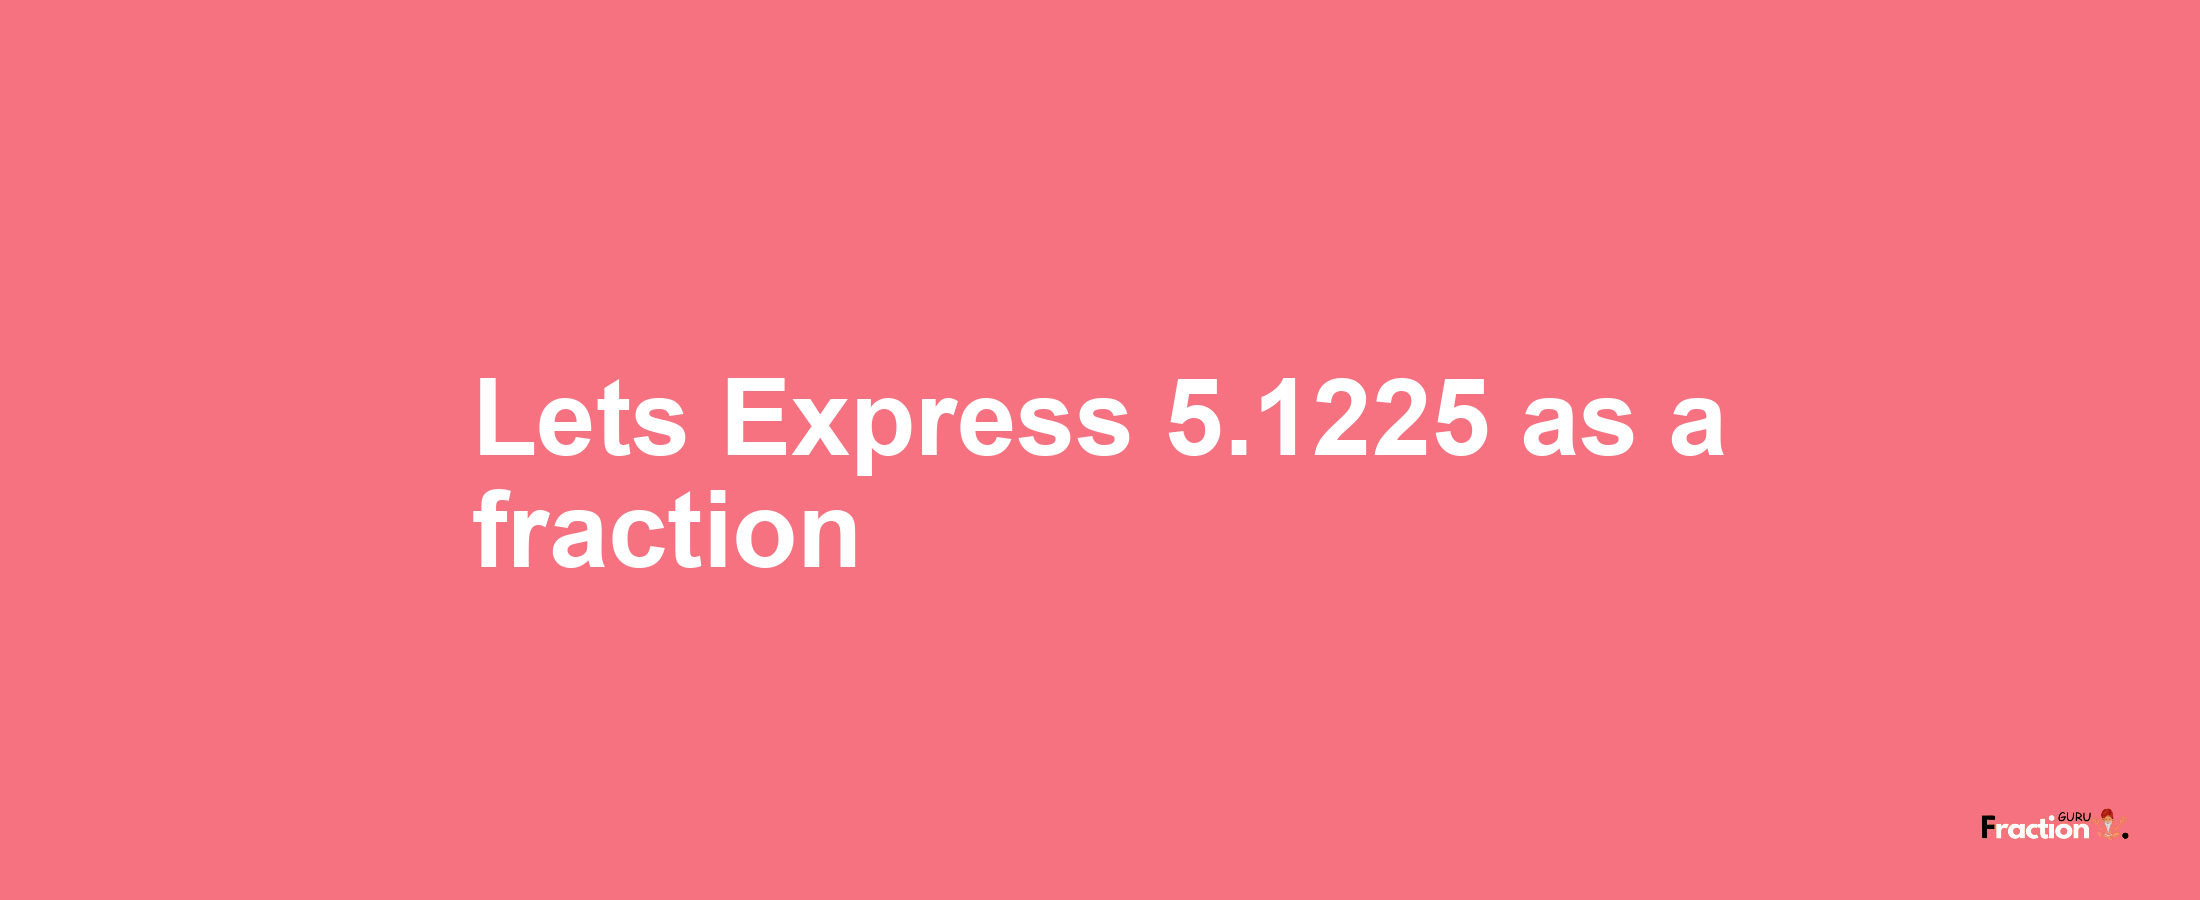 Lets Express 5.1225 as afraction